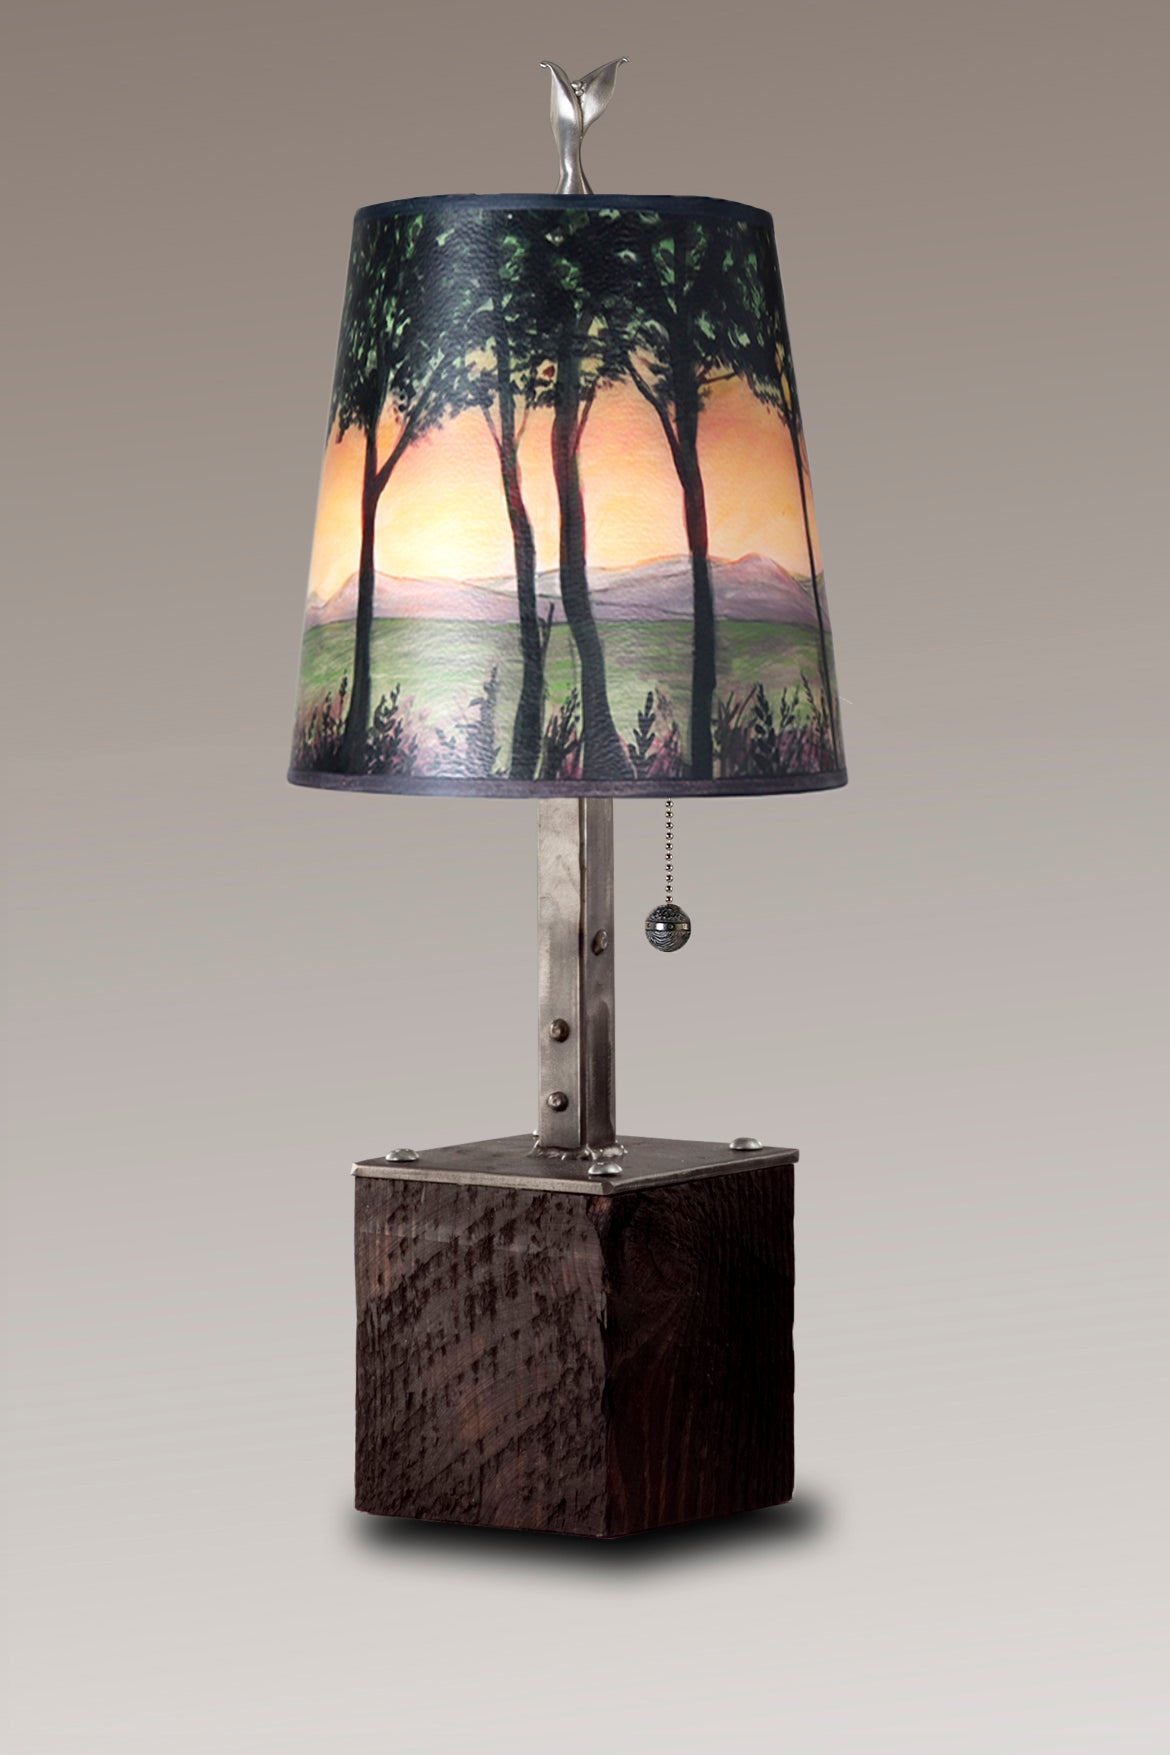 Janna Ugone &amp; Co Table Lamps Steel Table Lamp on Reclaimed Wood with Small Drum Shade in Dawn